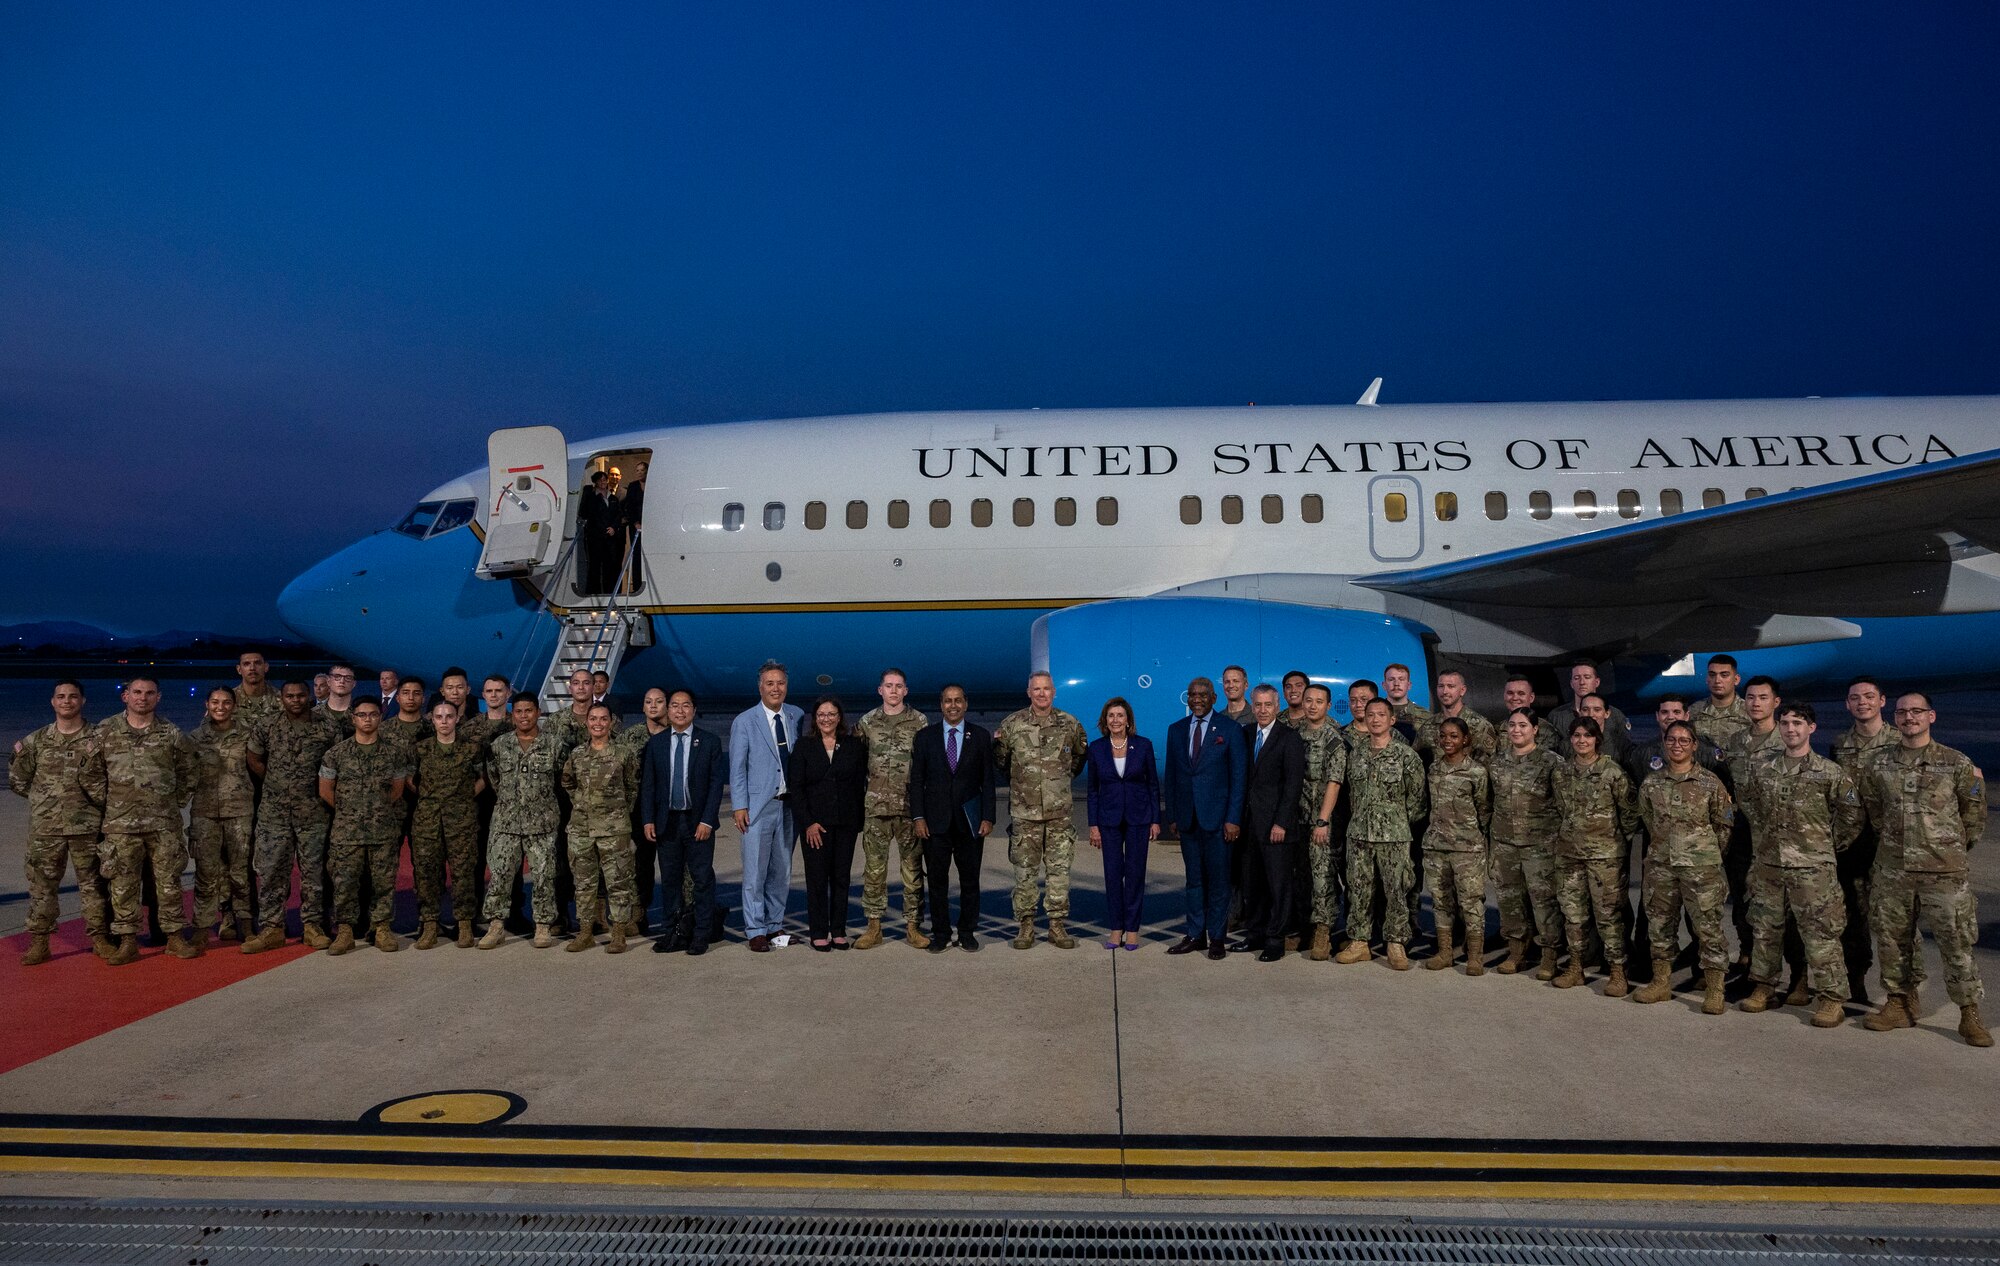 Nancy Pelosi, Speaker of the U.S. House of Representatives, and a Congressional delegation pose for a photo with Republic of Korea representatives and U.S. service members at Osan Air Base, ROK, Aug. 4, 2022.